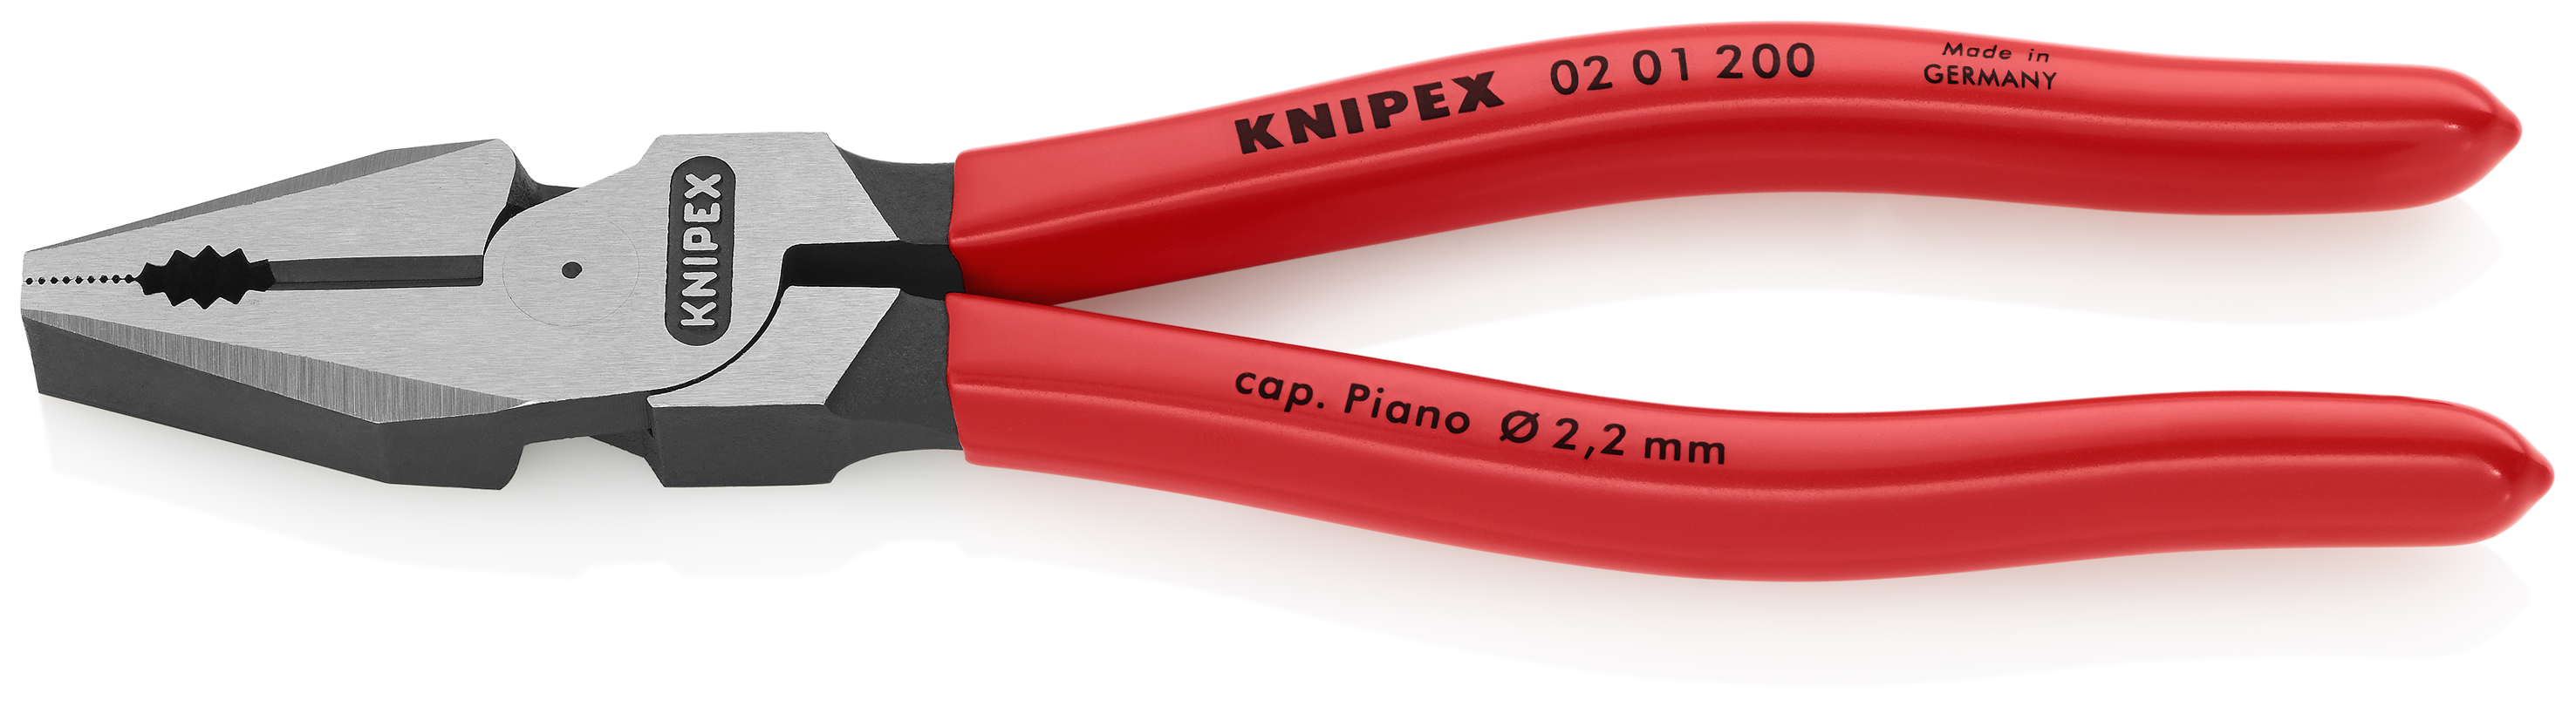 KNIPEX Tools 02 01 200, 8-Inch High Leverage Combination Pliers - image 1 of 8